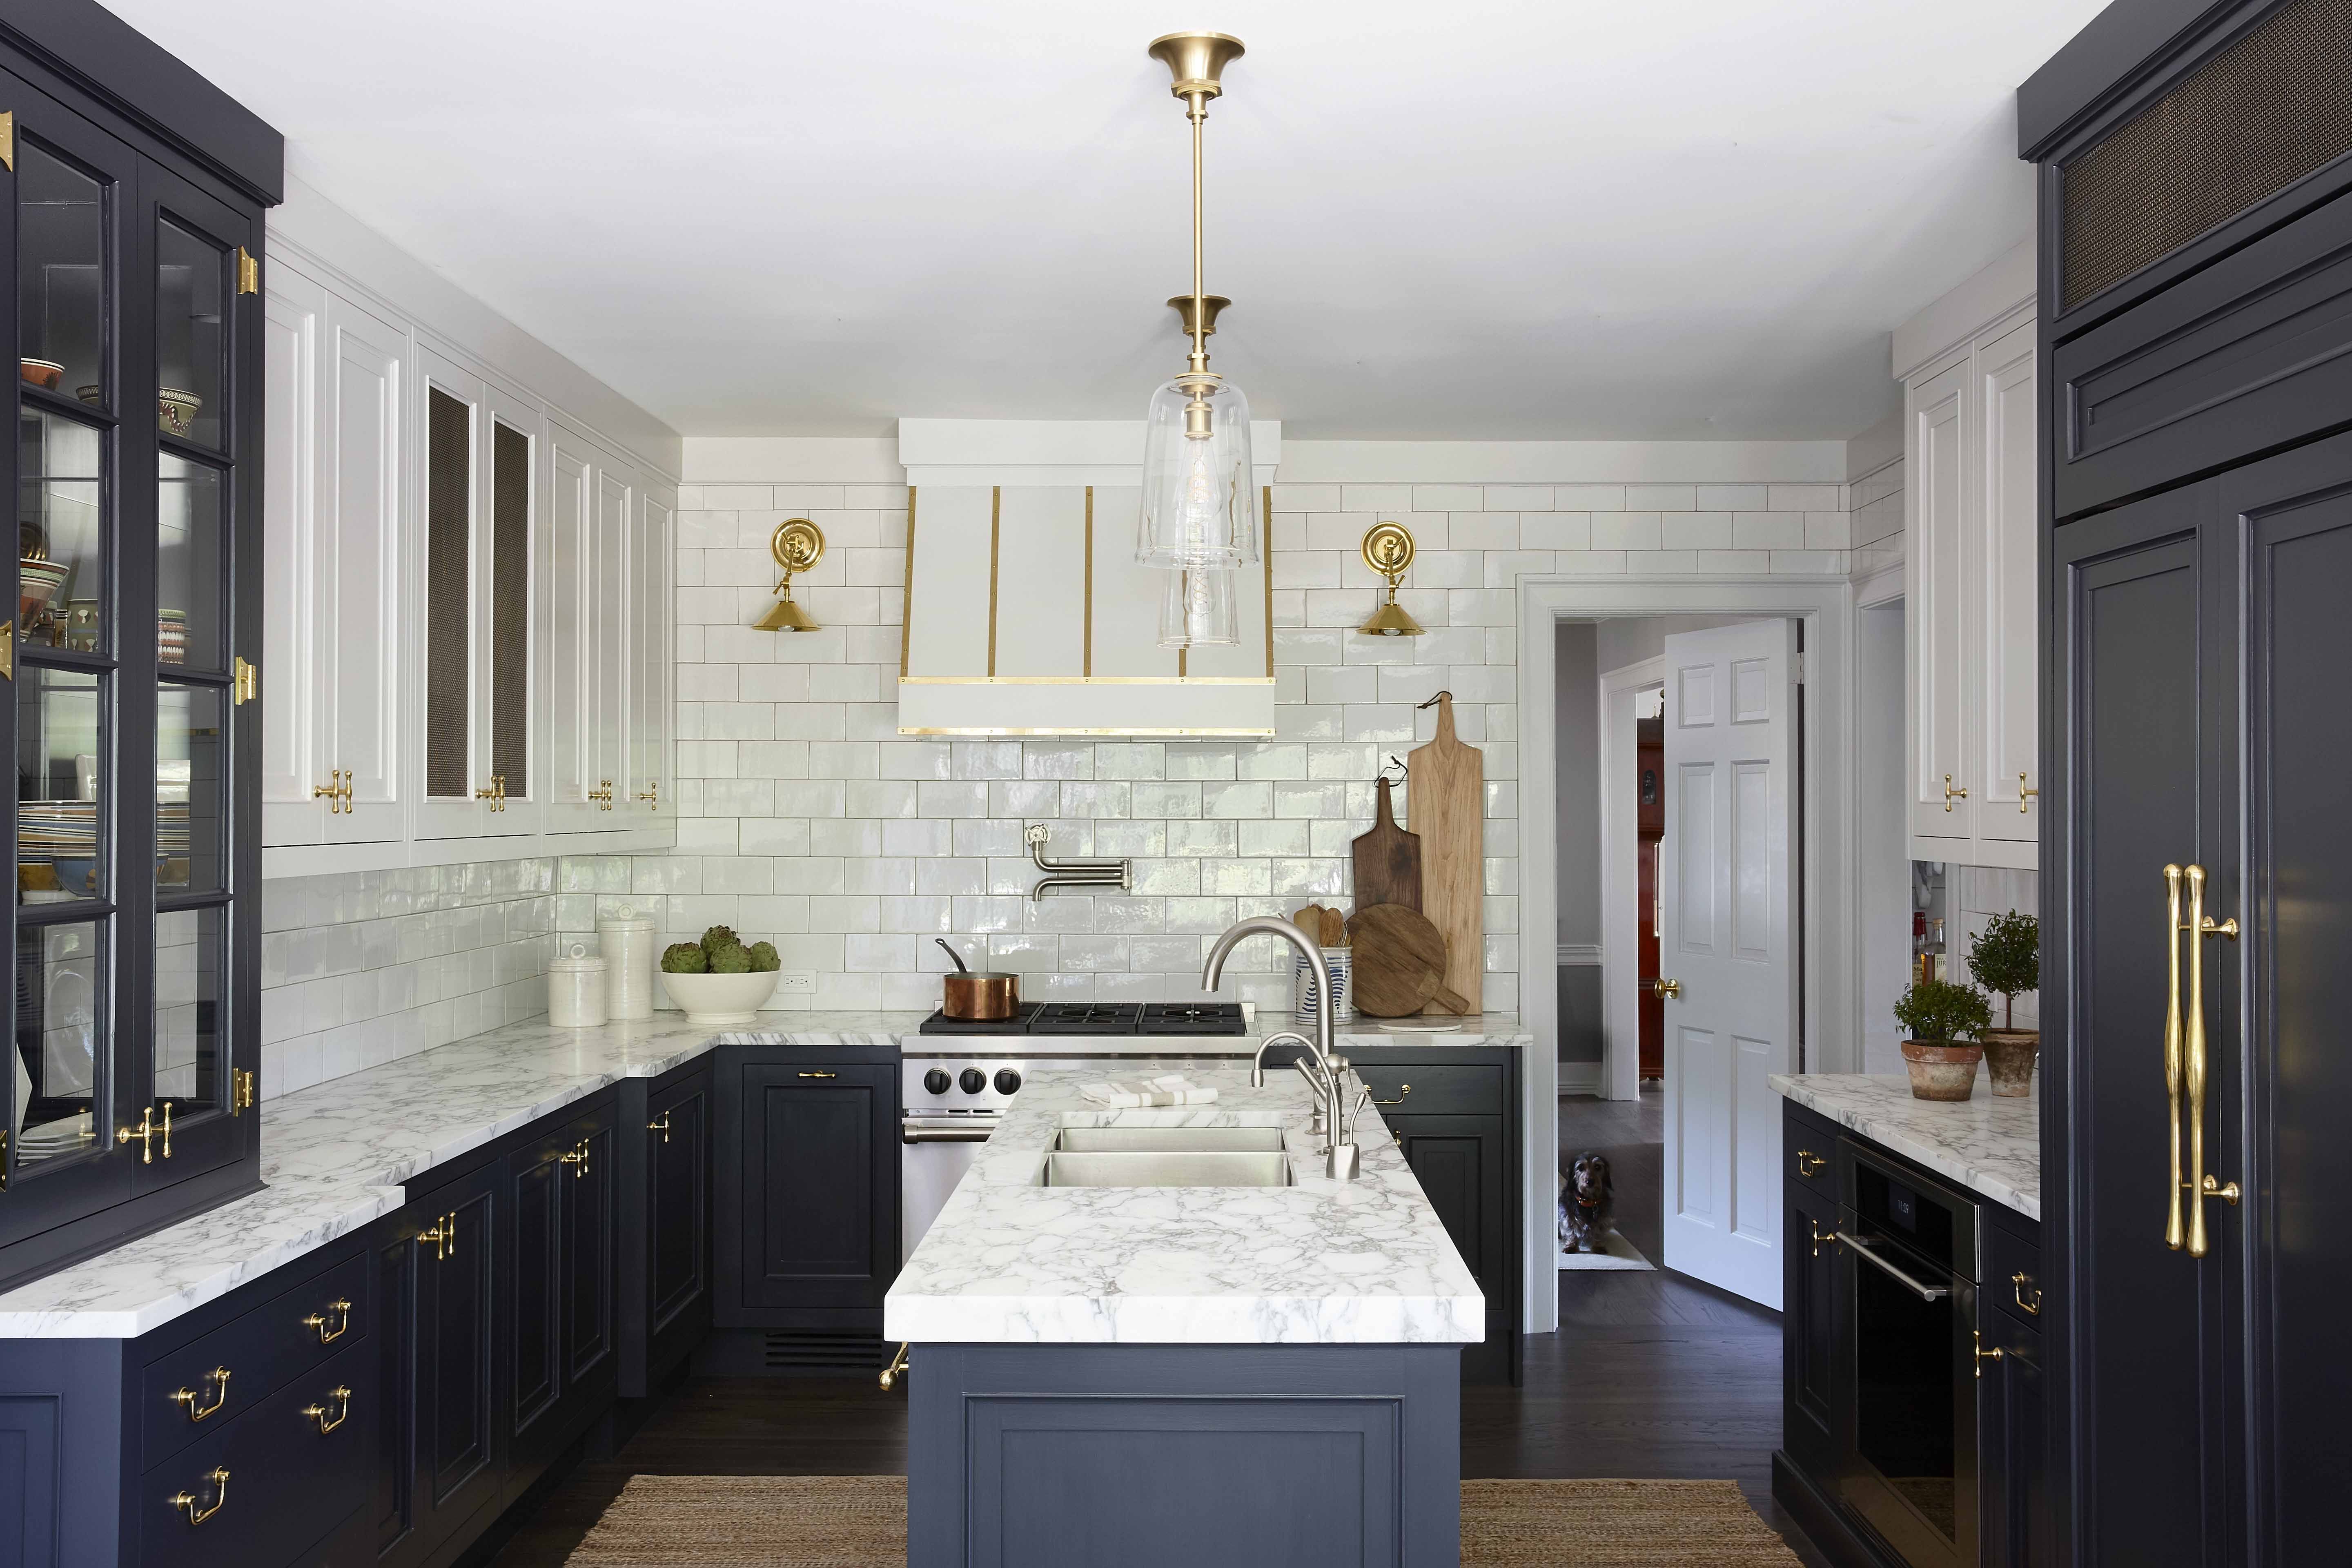 Common Kitchen Design Mistakes: Why is the cabinet above the sink